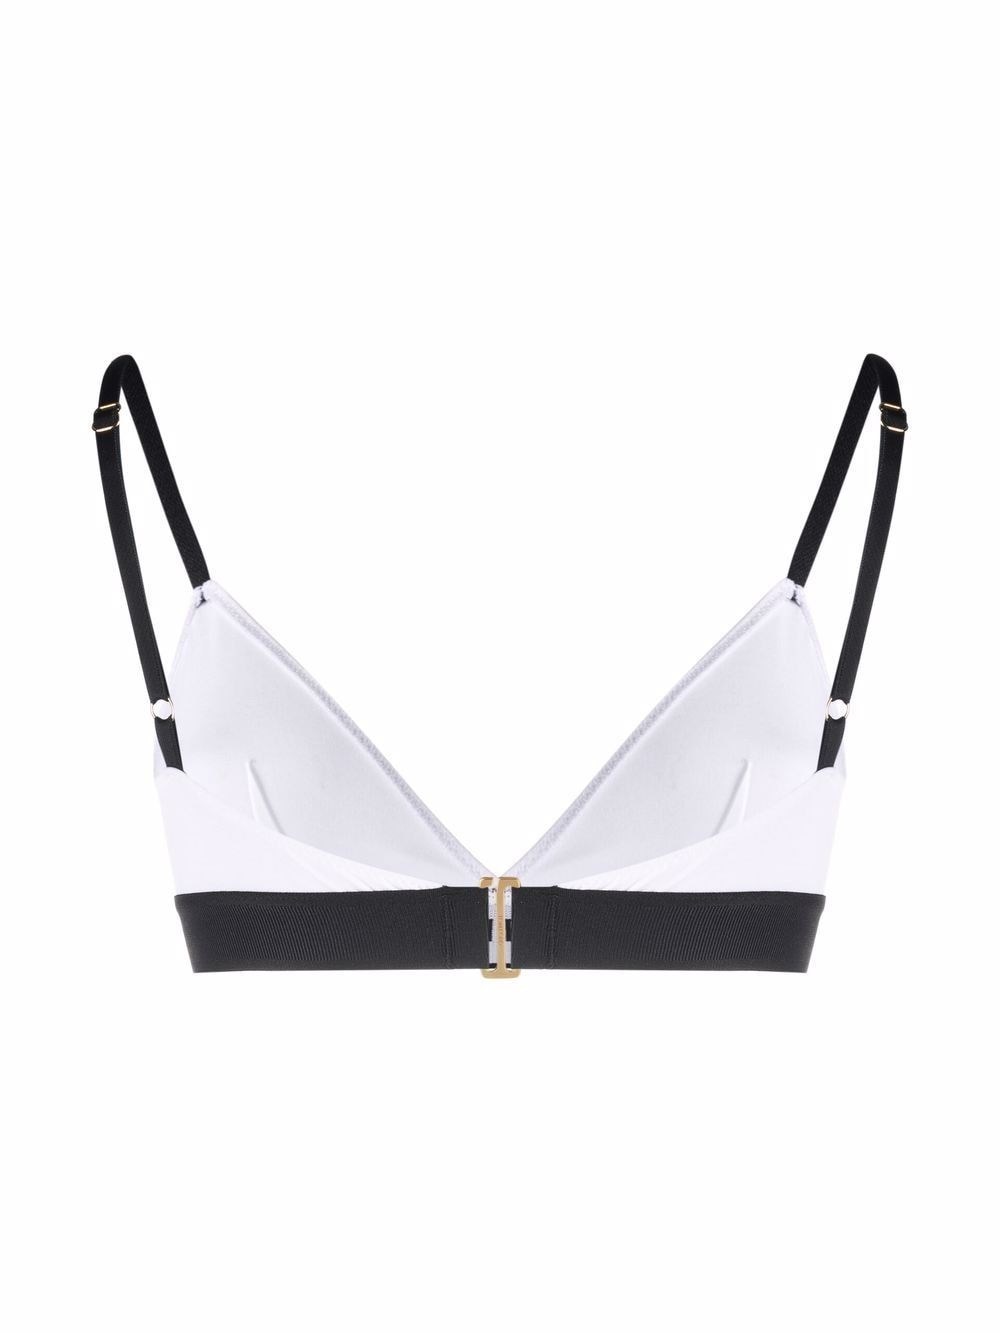 Tom Ford Beige Triangle Bra With Logo Underband In Jersey Woman